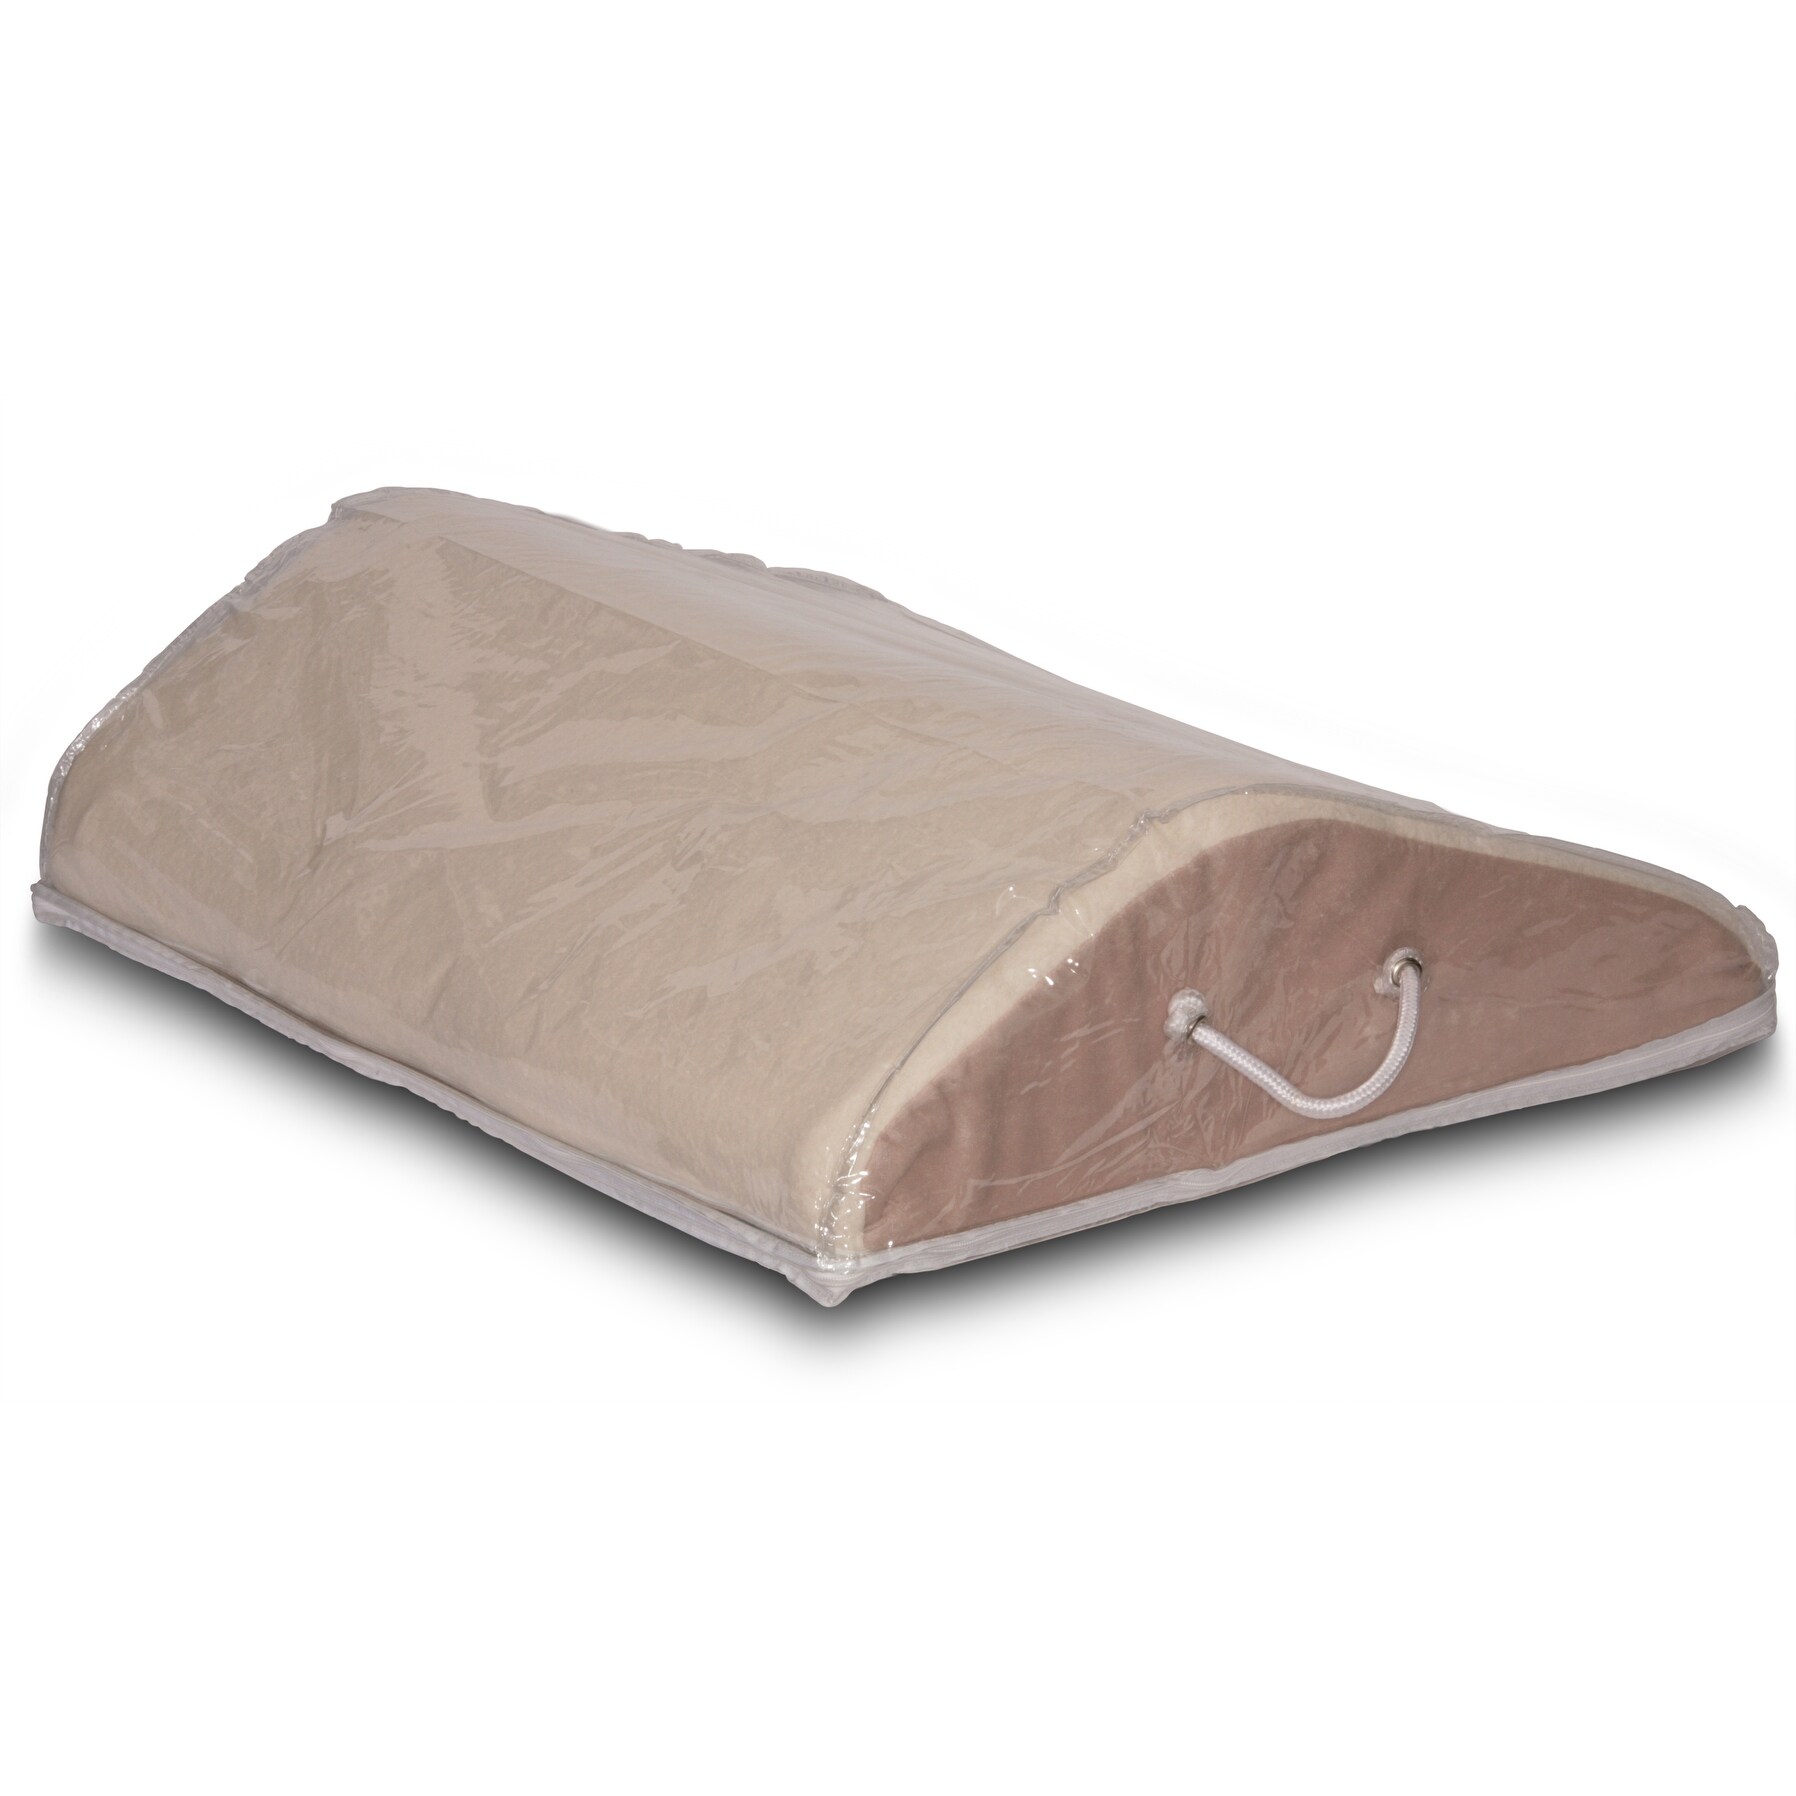 Sloped Knee Lift, 24 x 20 x 6.5 - Tailbone Support - Leg Positioner  Pillow - On Sale - Bed Bath & Beyond - 34663861